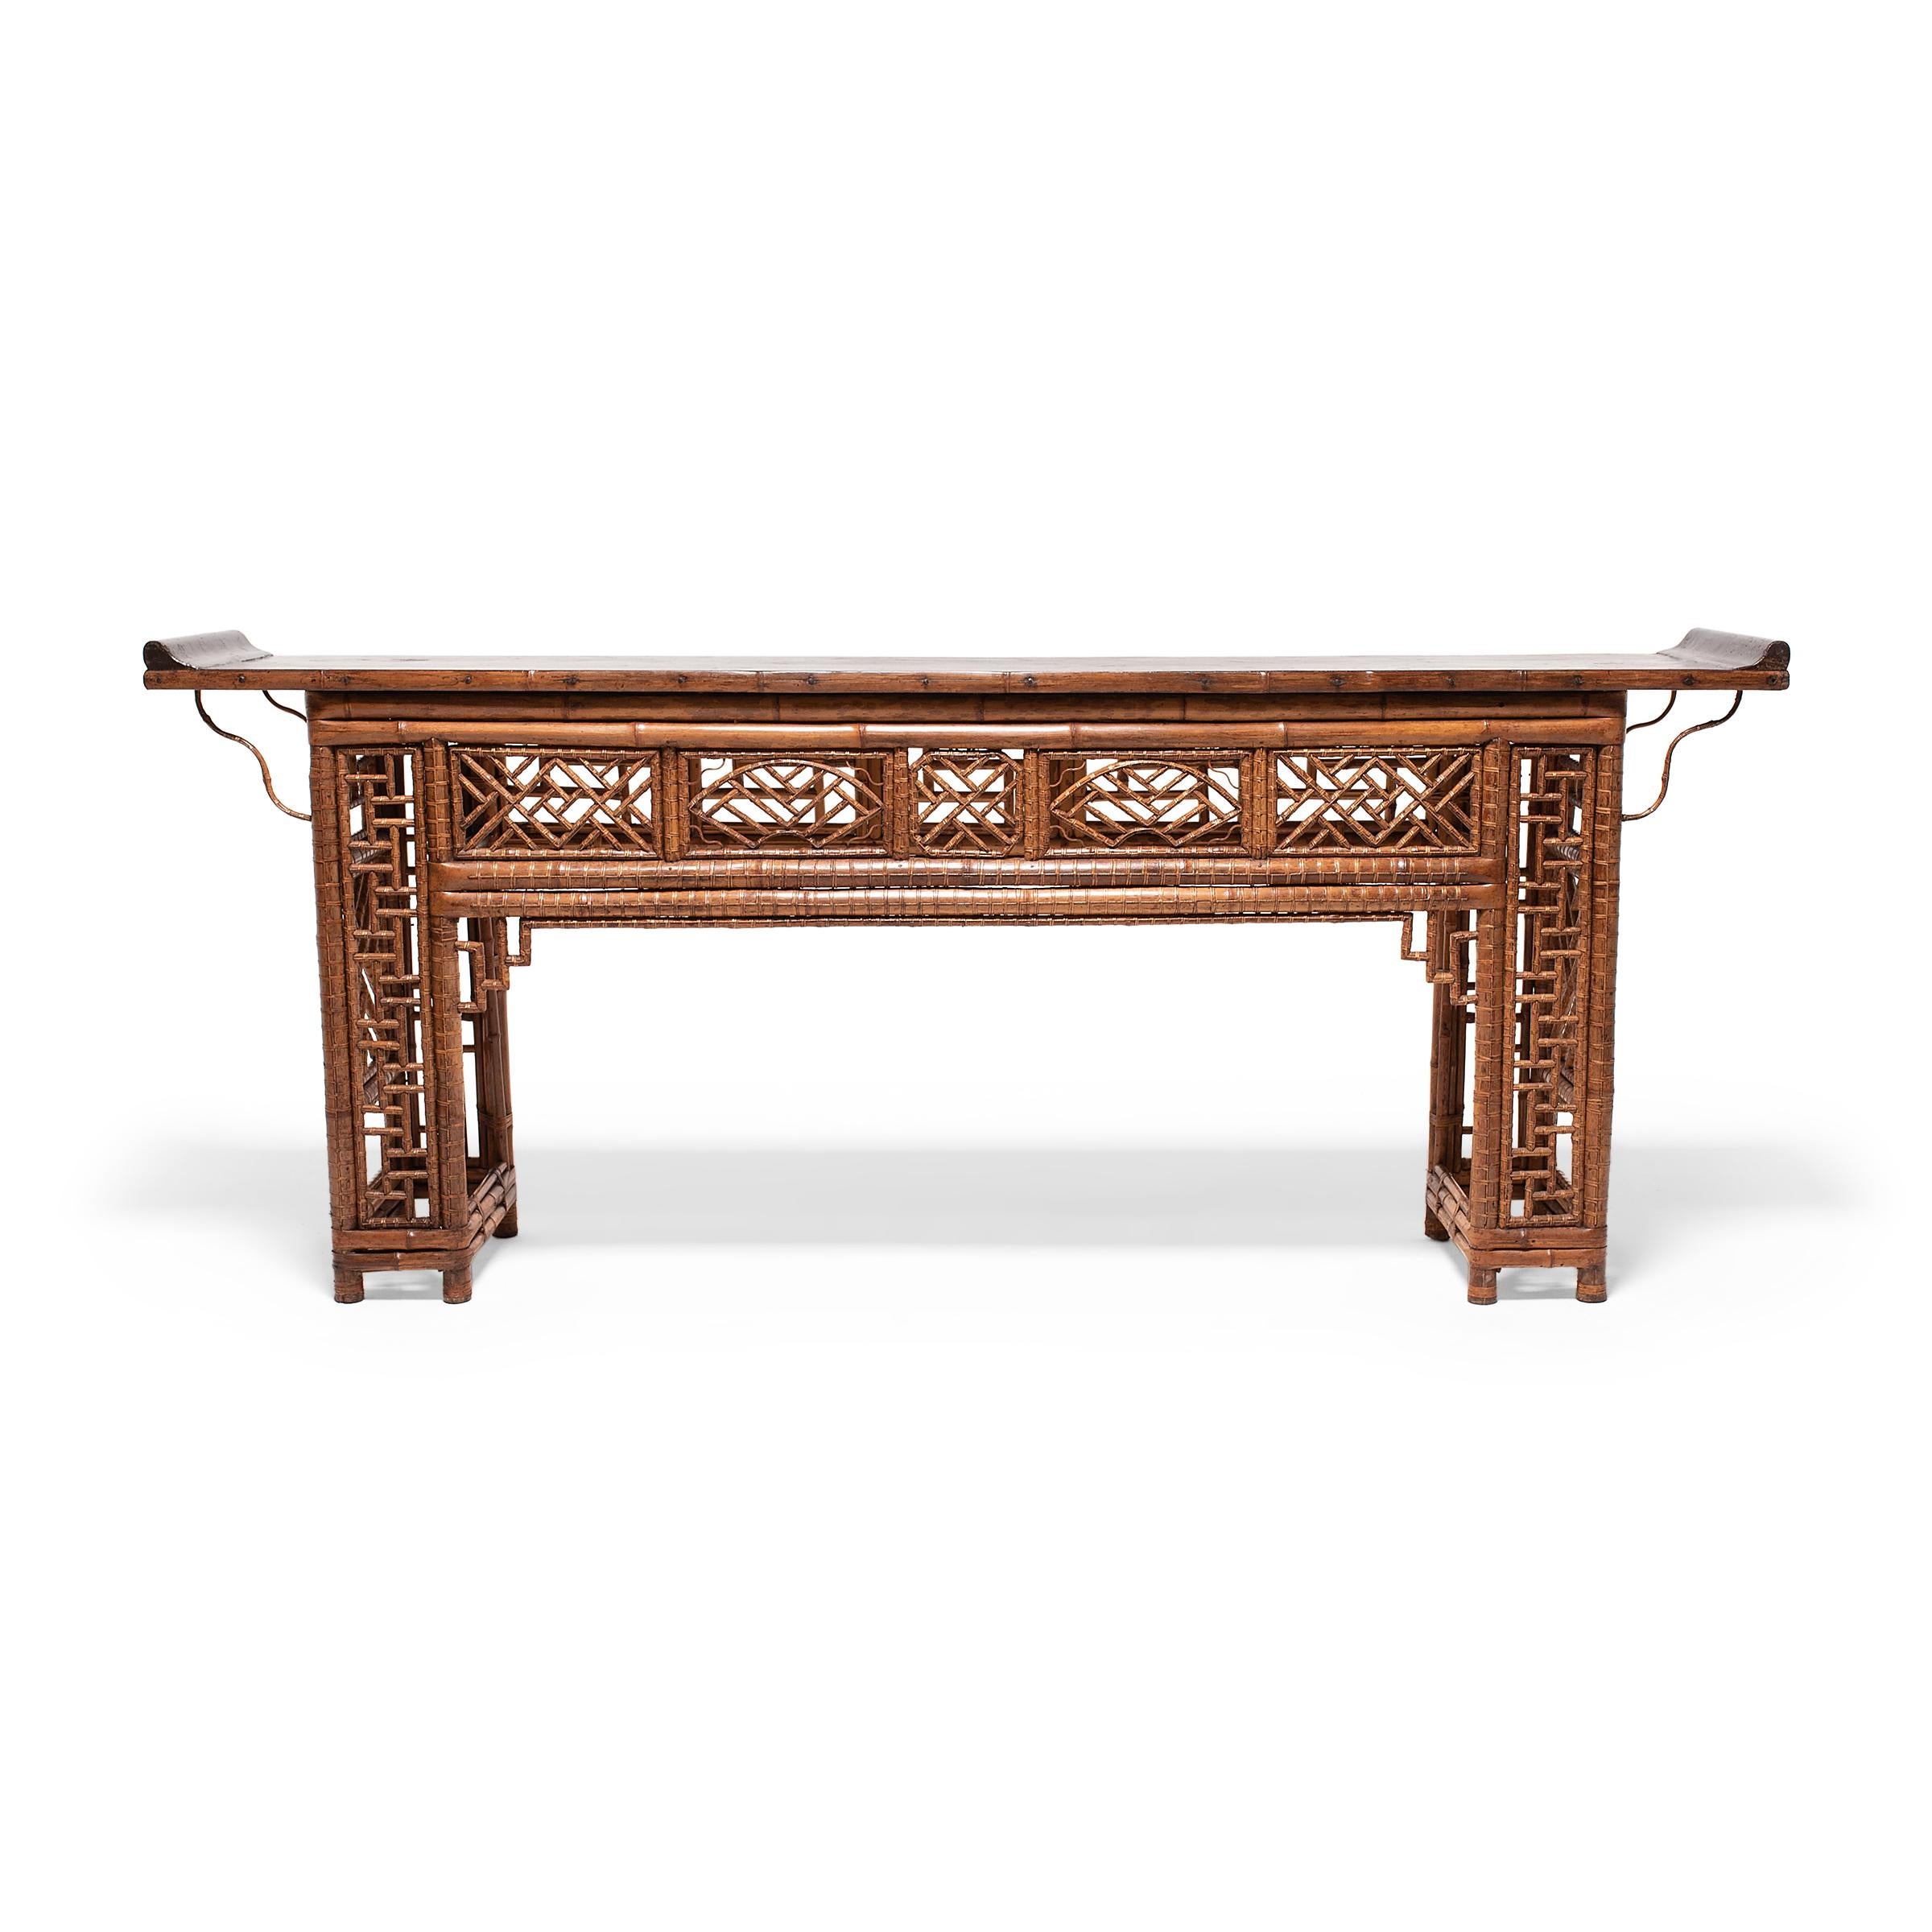 The artisan who created this exquisite lattice altar table must have truly been a master of their craft. Constructed of carefully bent spotted bamboo, the table has a straight, open frame patterned with intricate bamboo latticework. Every available